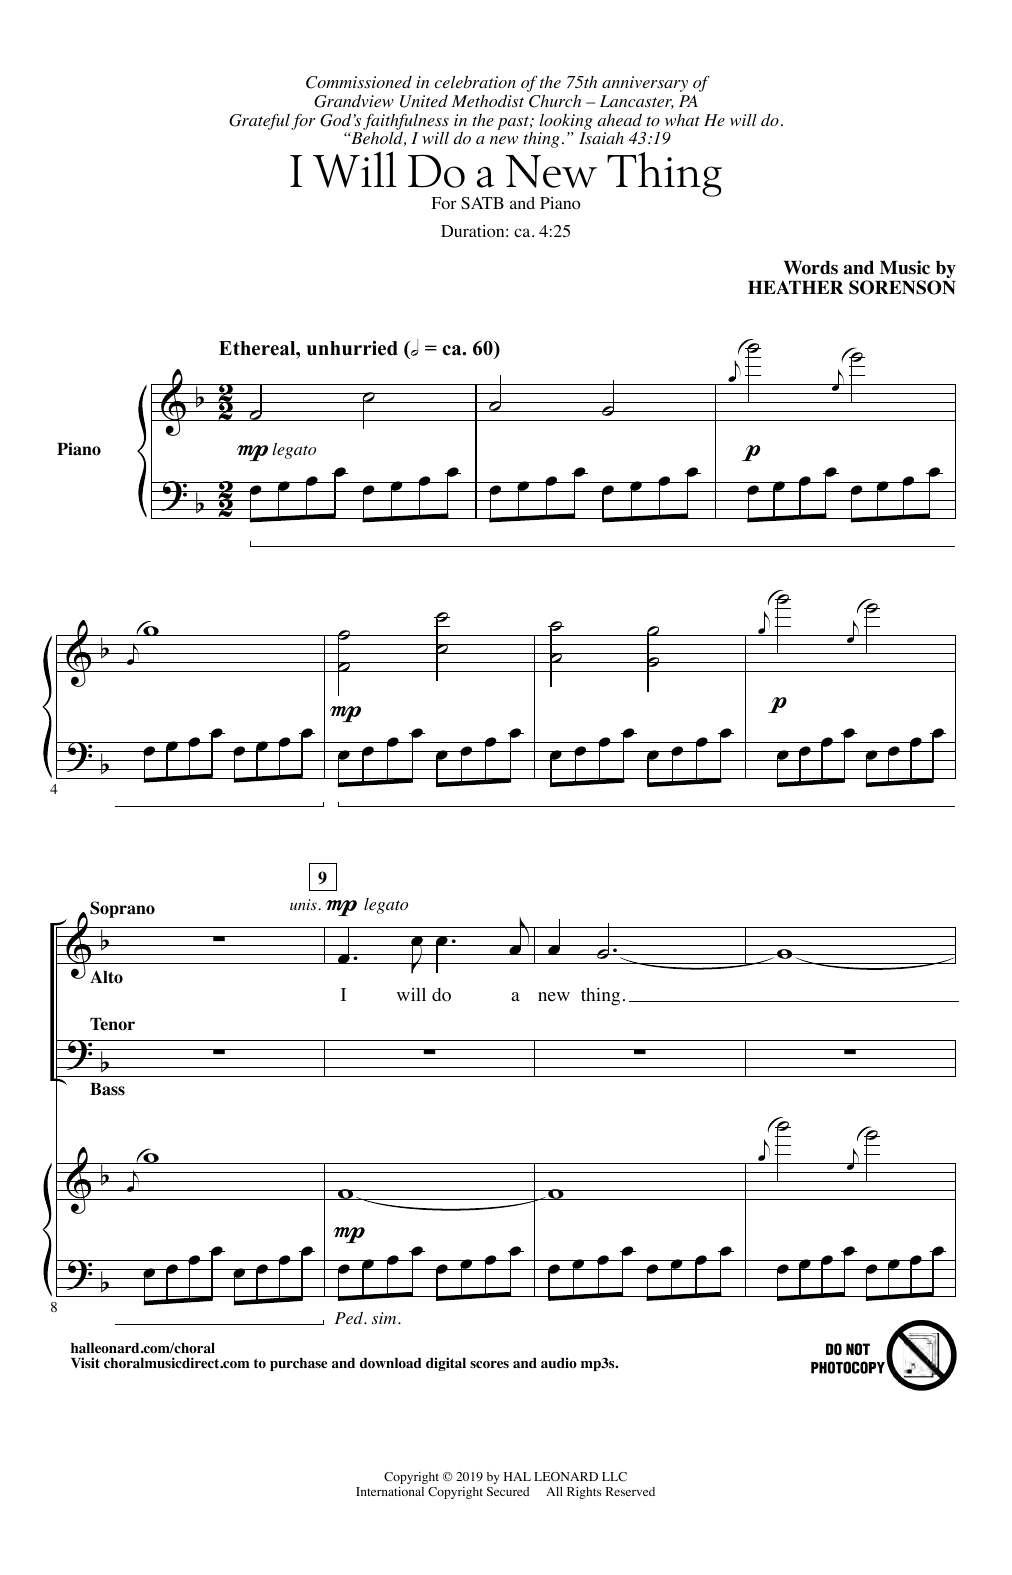 Download Heather Sorenson I Will Do A New Thing Sheet Music